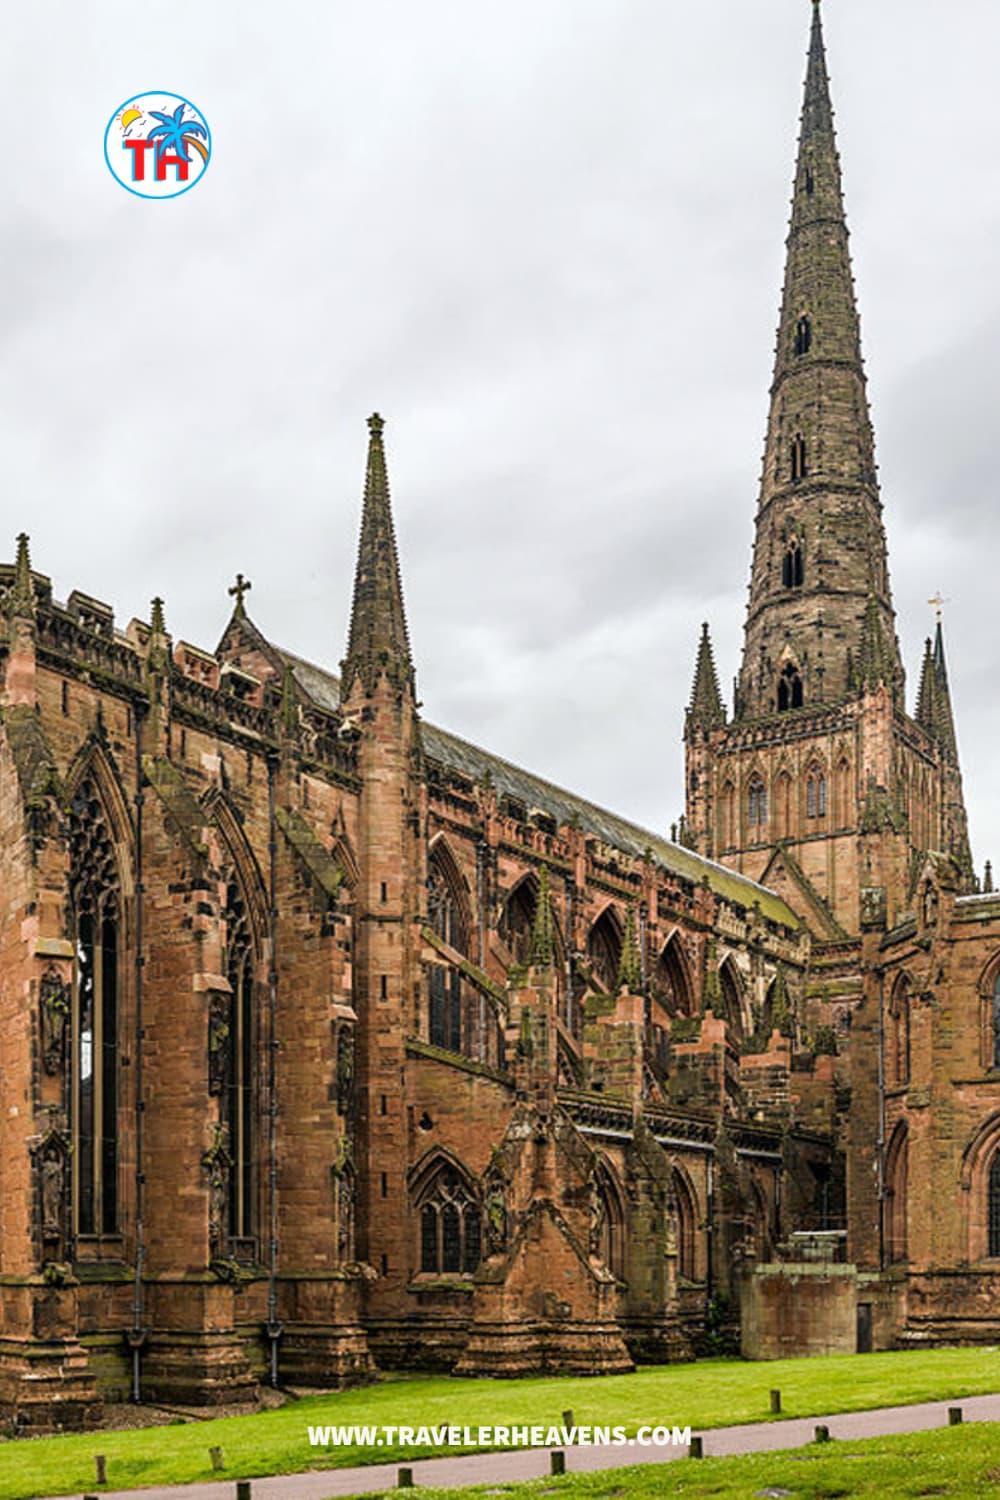 Beautiful Destinations, Best Places to Visit in Lichfield, Travel to Lichfield, UK, UK Best Places, UK Travel Guide, Visit Lichfield